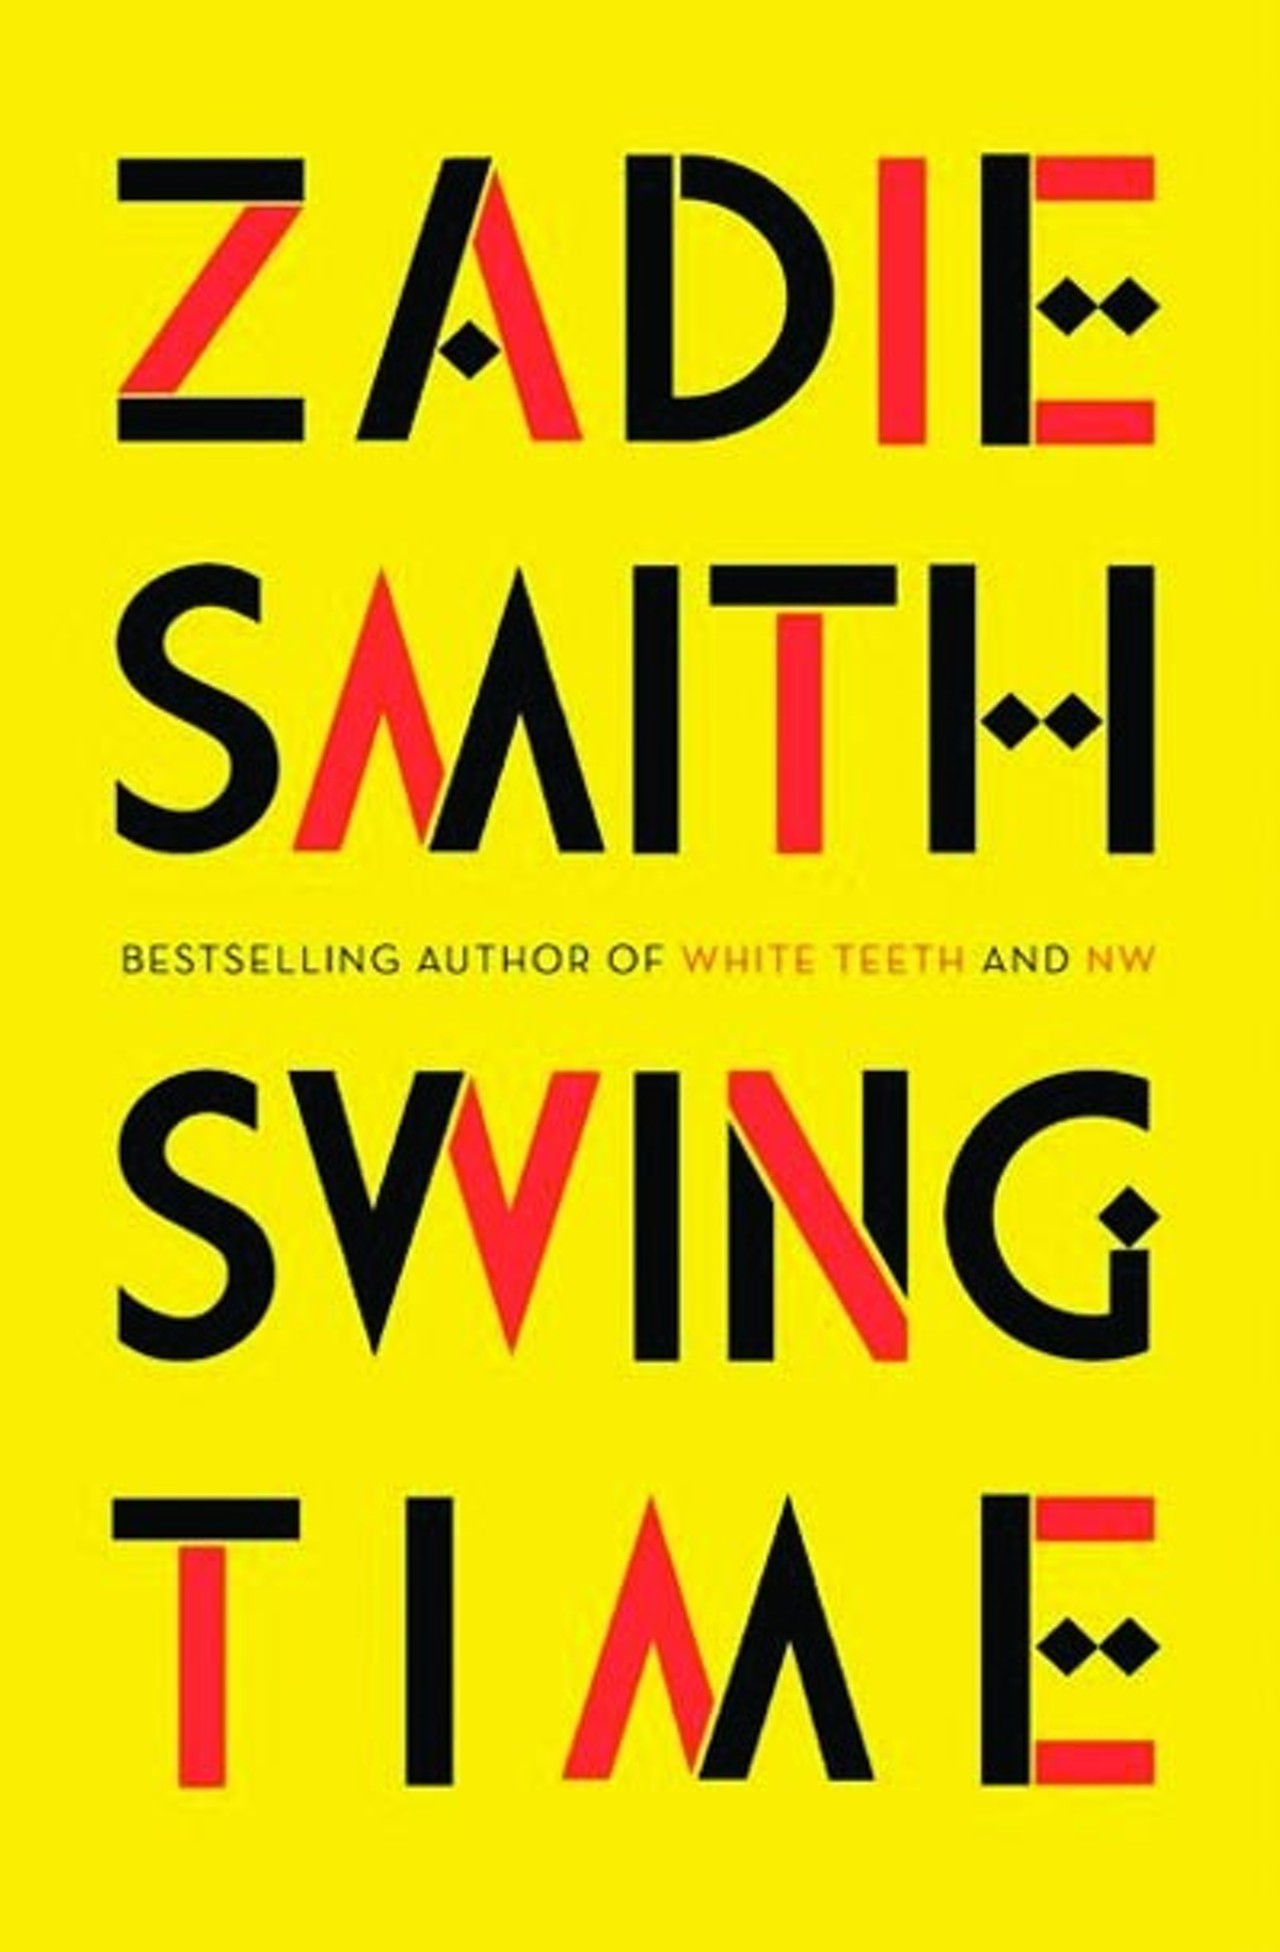 Swing Time by Zadie Smith -
Zadie Smith, best known for her tour de force debut novel White Teeth, has written what may be her finest work to date with Swing Time. Smith's fifth book explores a friendship between two black girls growing up in the United Kingdom who bond over dancing and dreams of making it big. One of them succeeds and ends up an international pop star. The other reckons with her life in relation to her famous friend. The novel, like many of Smith's previous works, is global in scope, moving from London to New York City to West Africa.